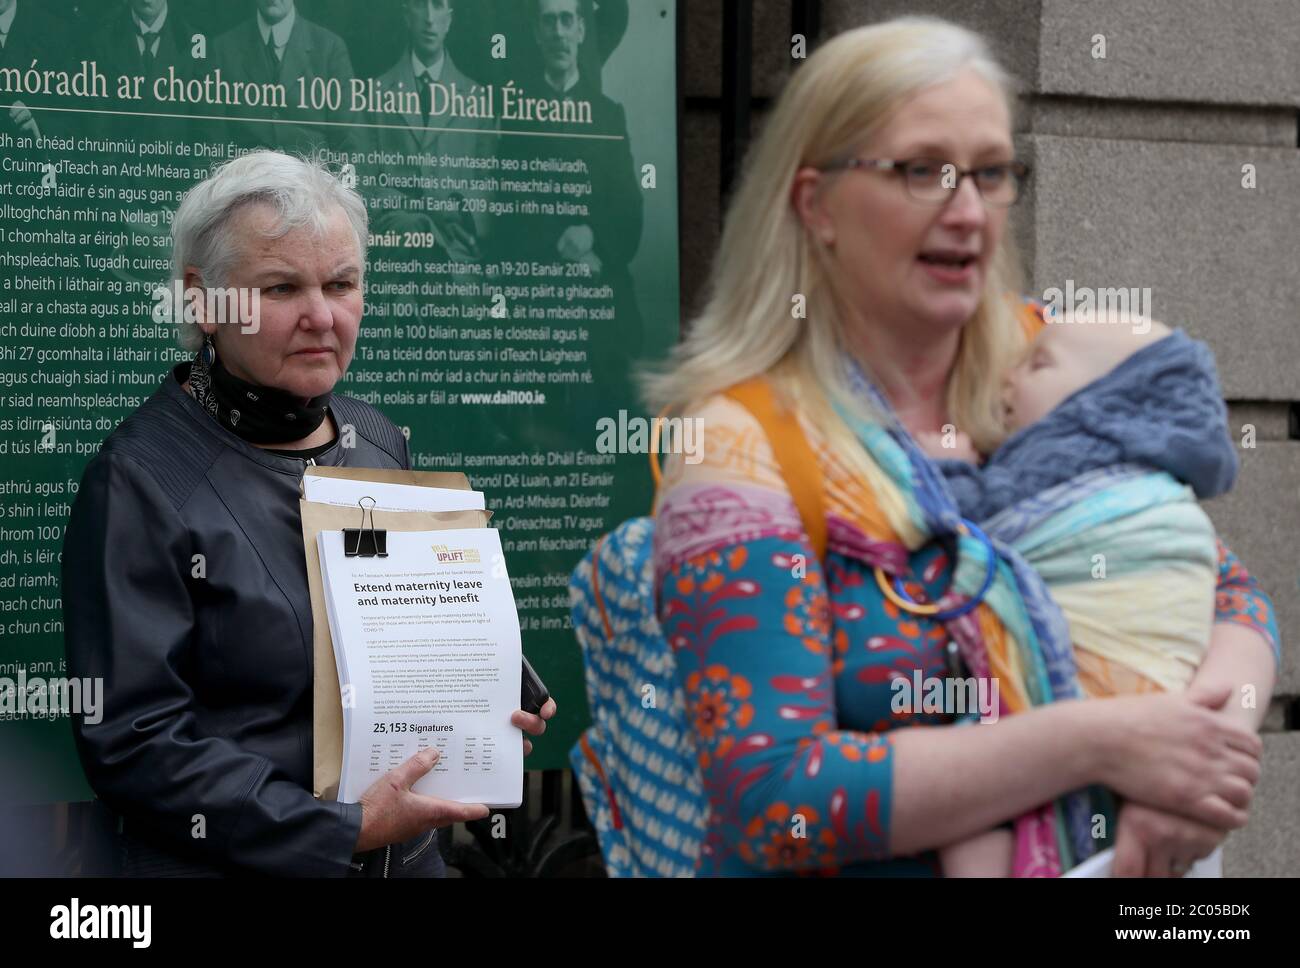 People Before Profit's Brid Smith holds a petition for Taoiseach Leo Varadkar, which was presented by mothers at Leinster House in Dublin, calling for an extension of maternity leave for 3 months due to the Covid-19 crisis. Stock Photo